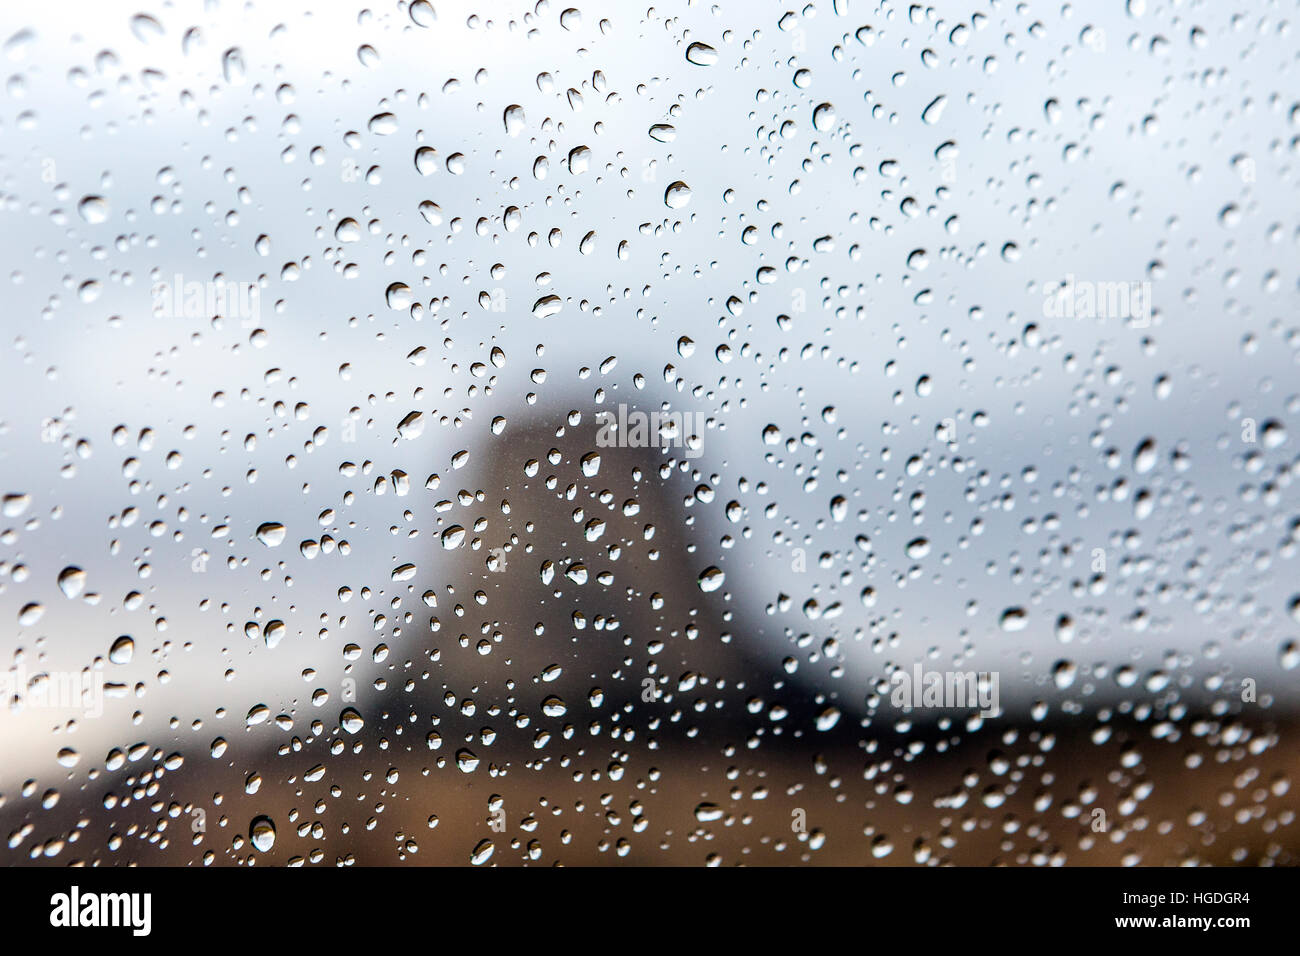 WY02245-00...WYOMING - Rain Drops on car window with Devils Tower in the distance, Devils Tower National Monument. Stock Photo